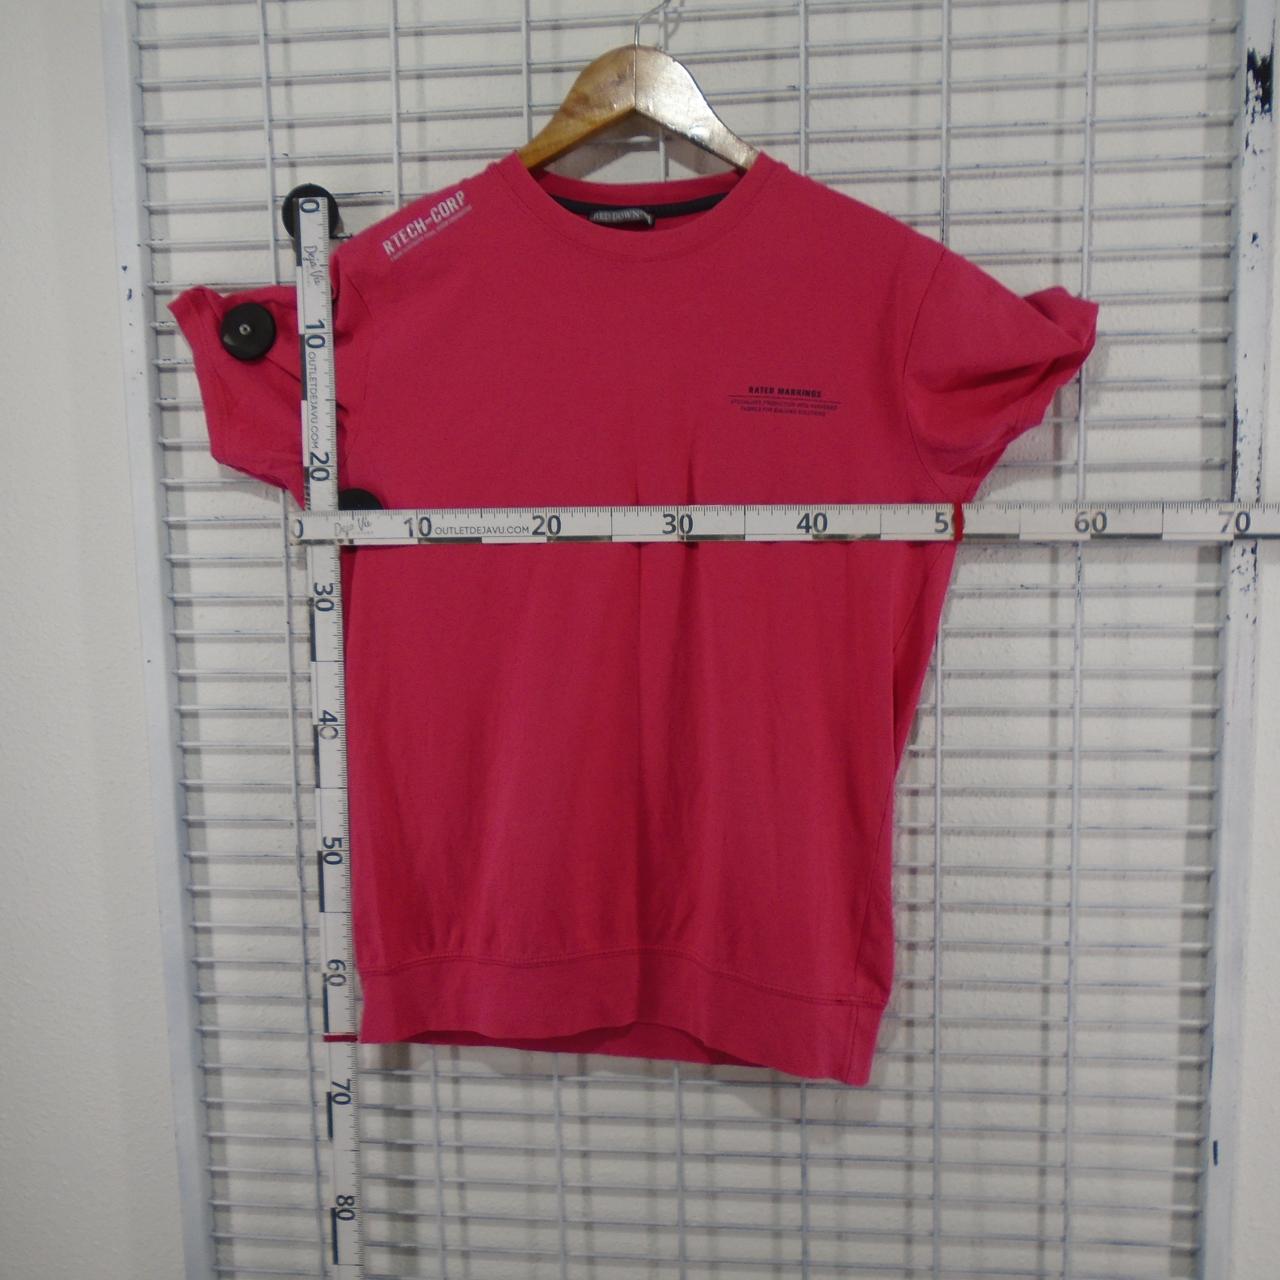 Women's T-Shirt Red Down. Pink. XL. Used. Good